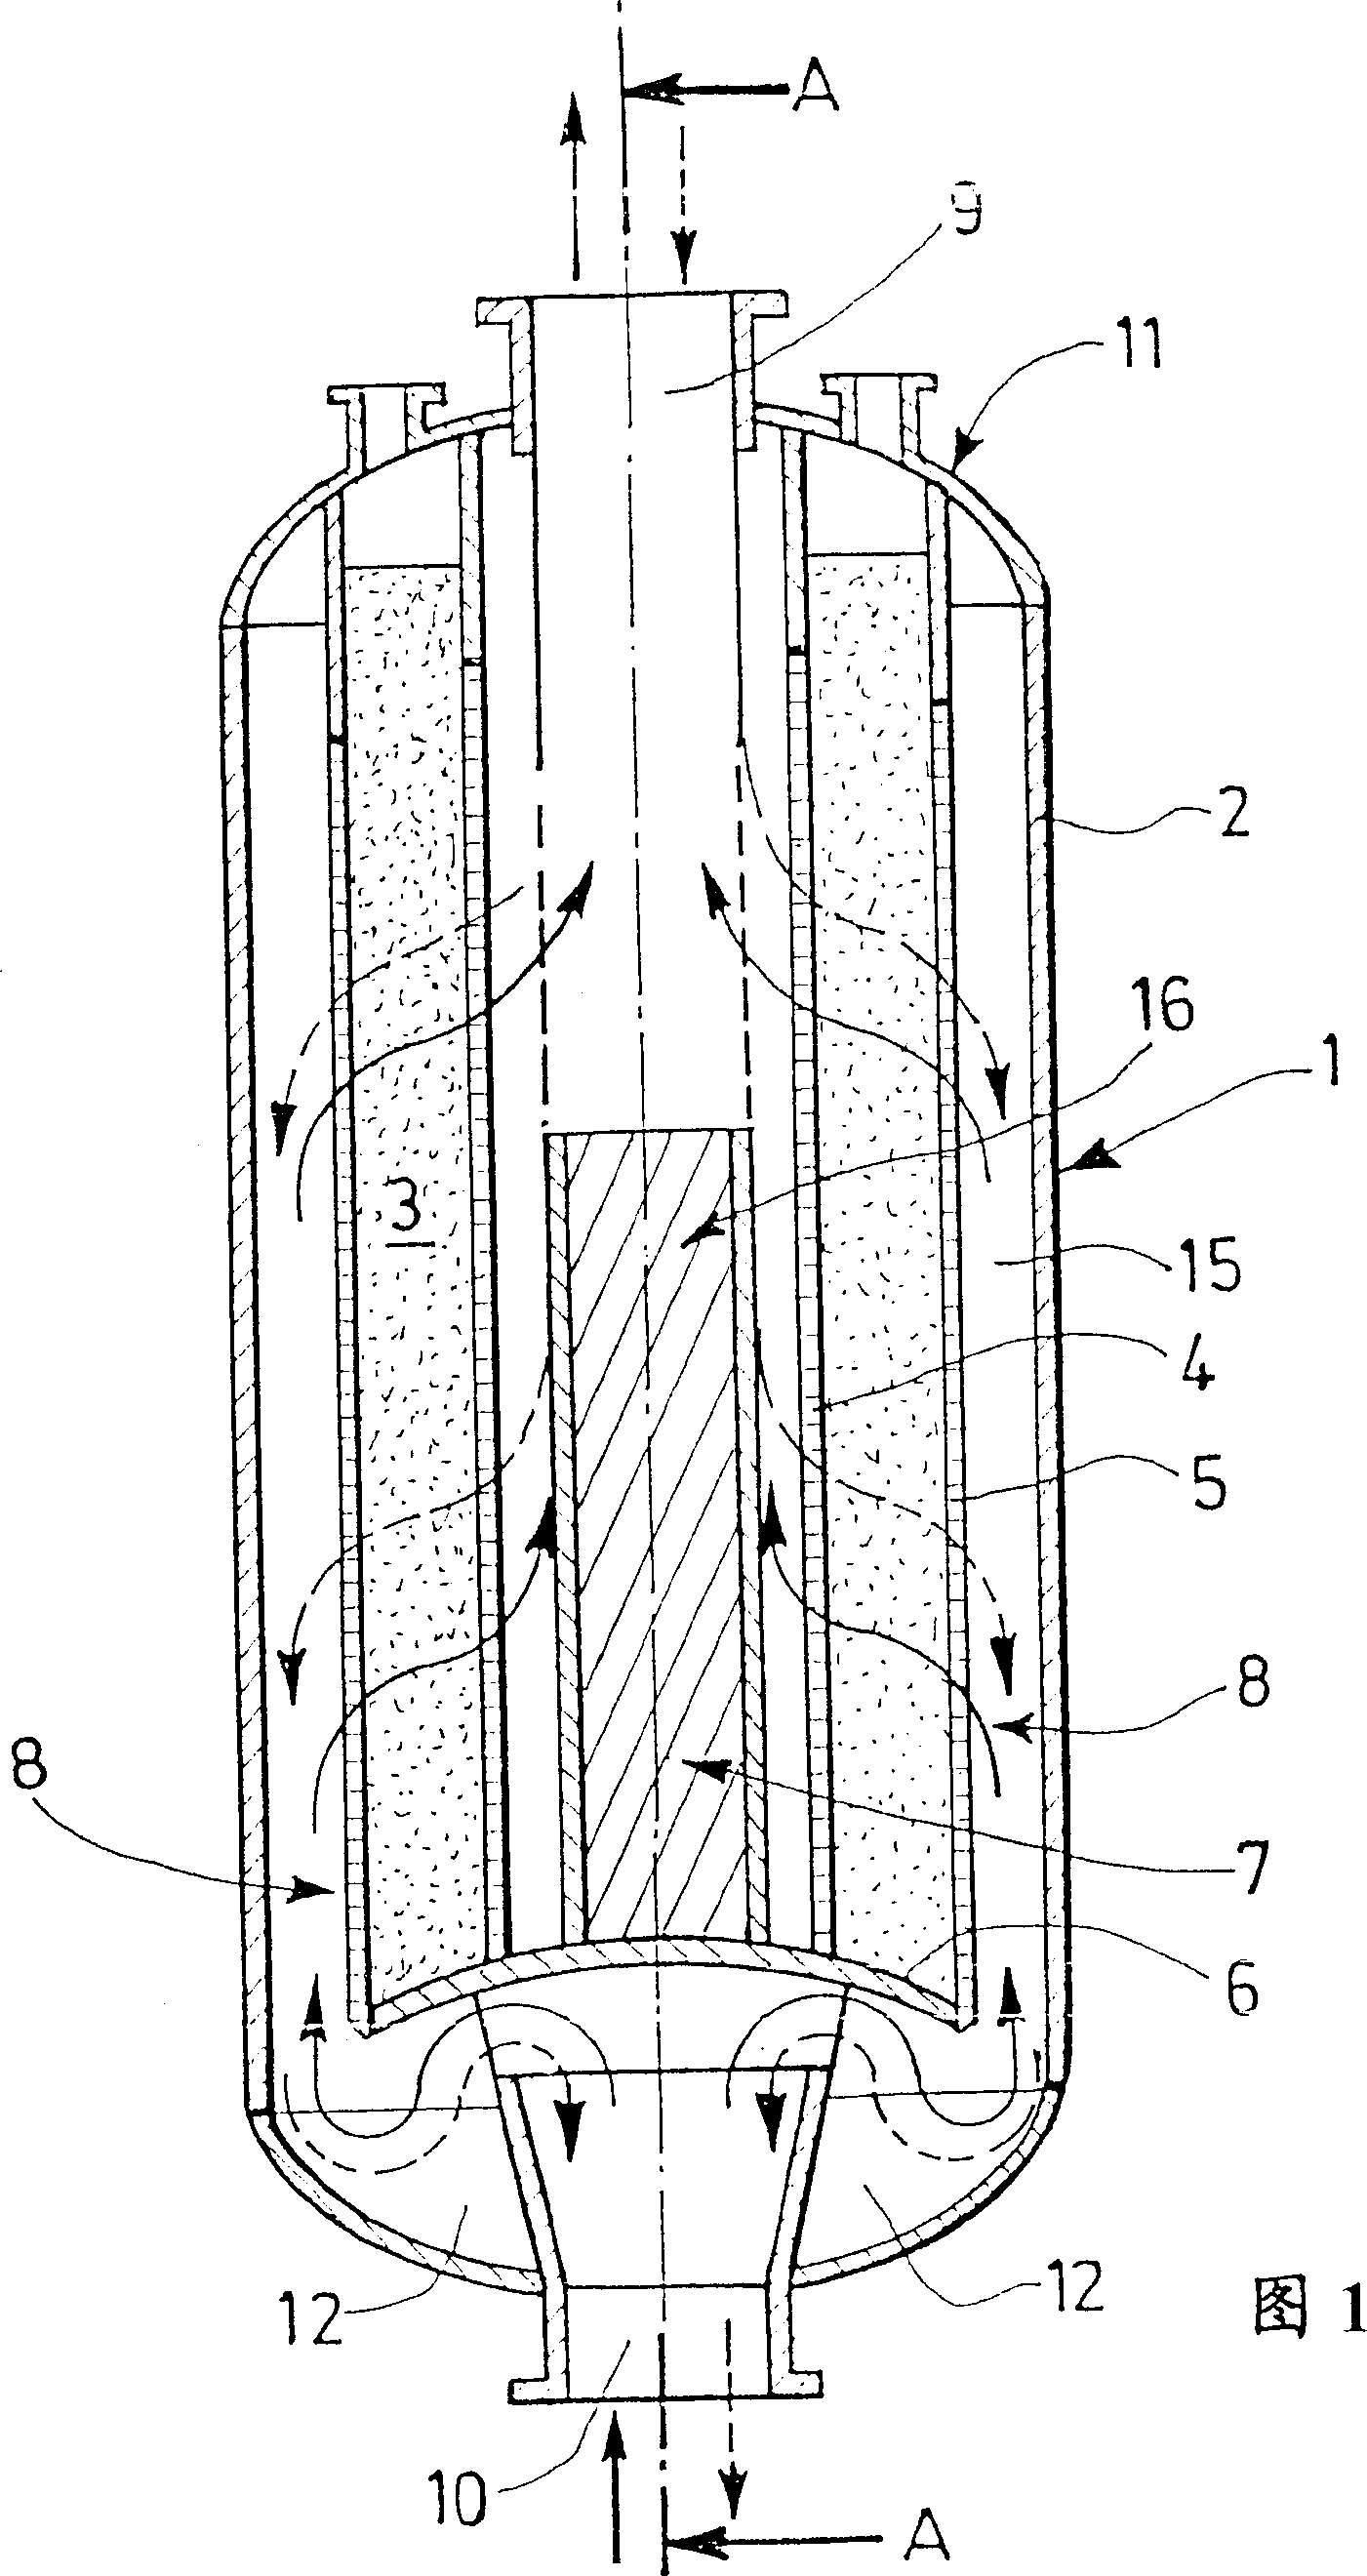 Method for prepurifying air in an accelerated tsa cycle